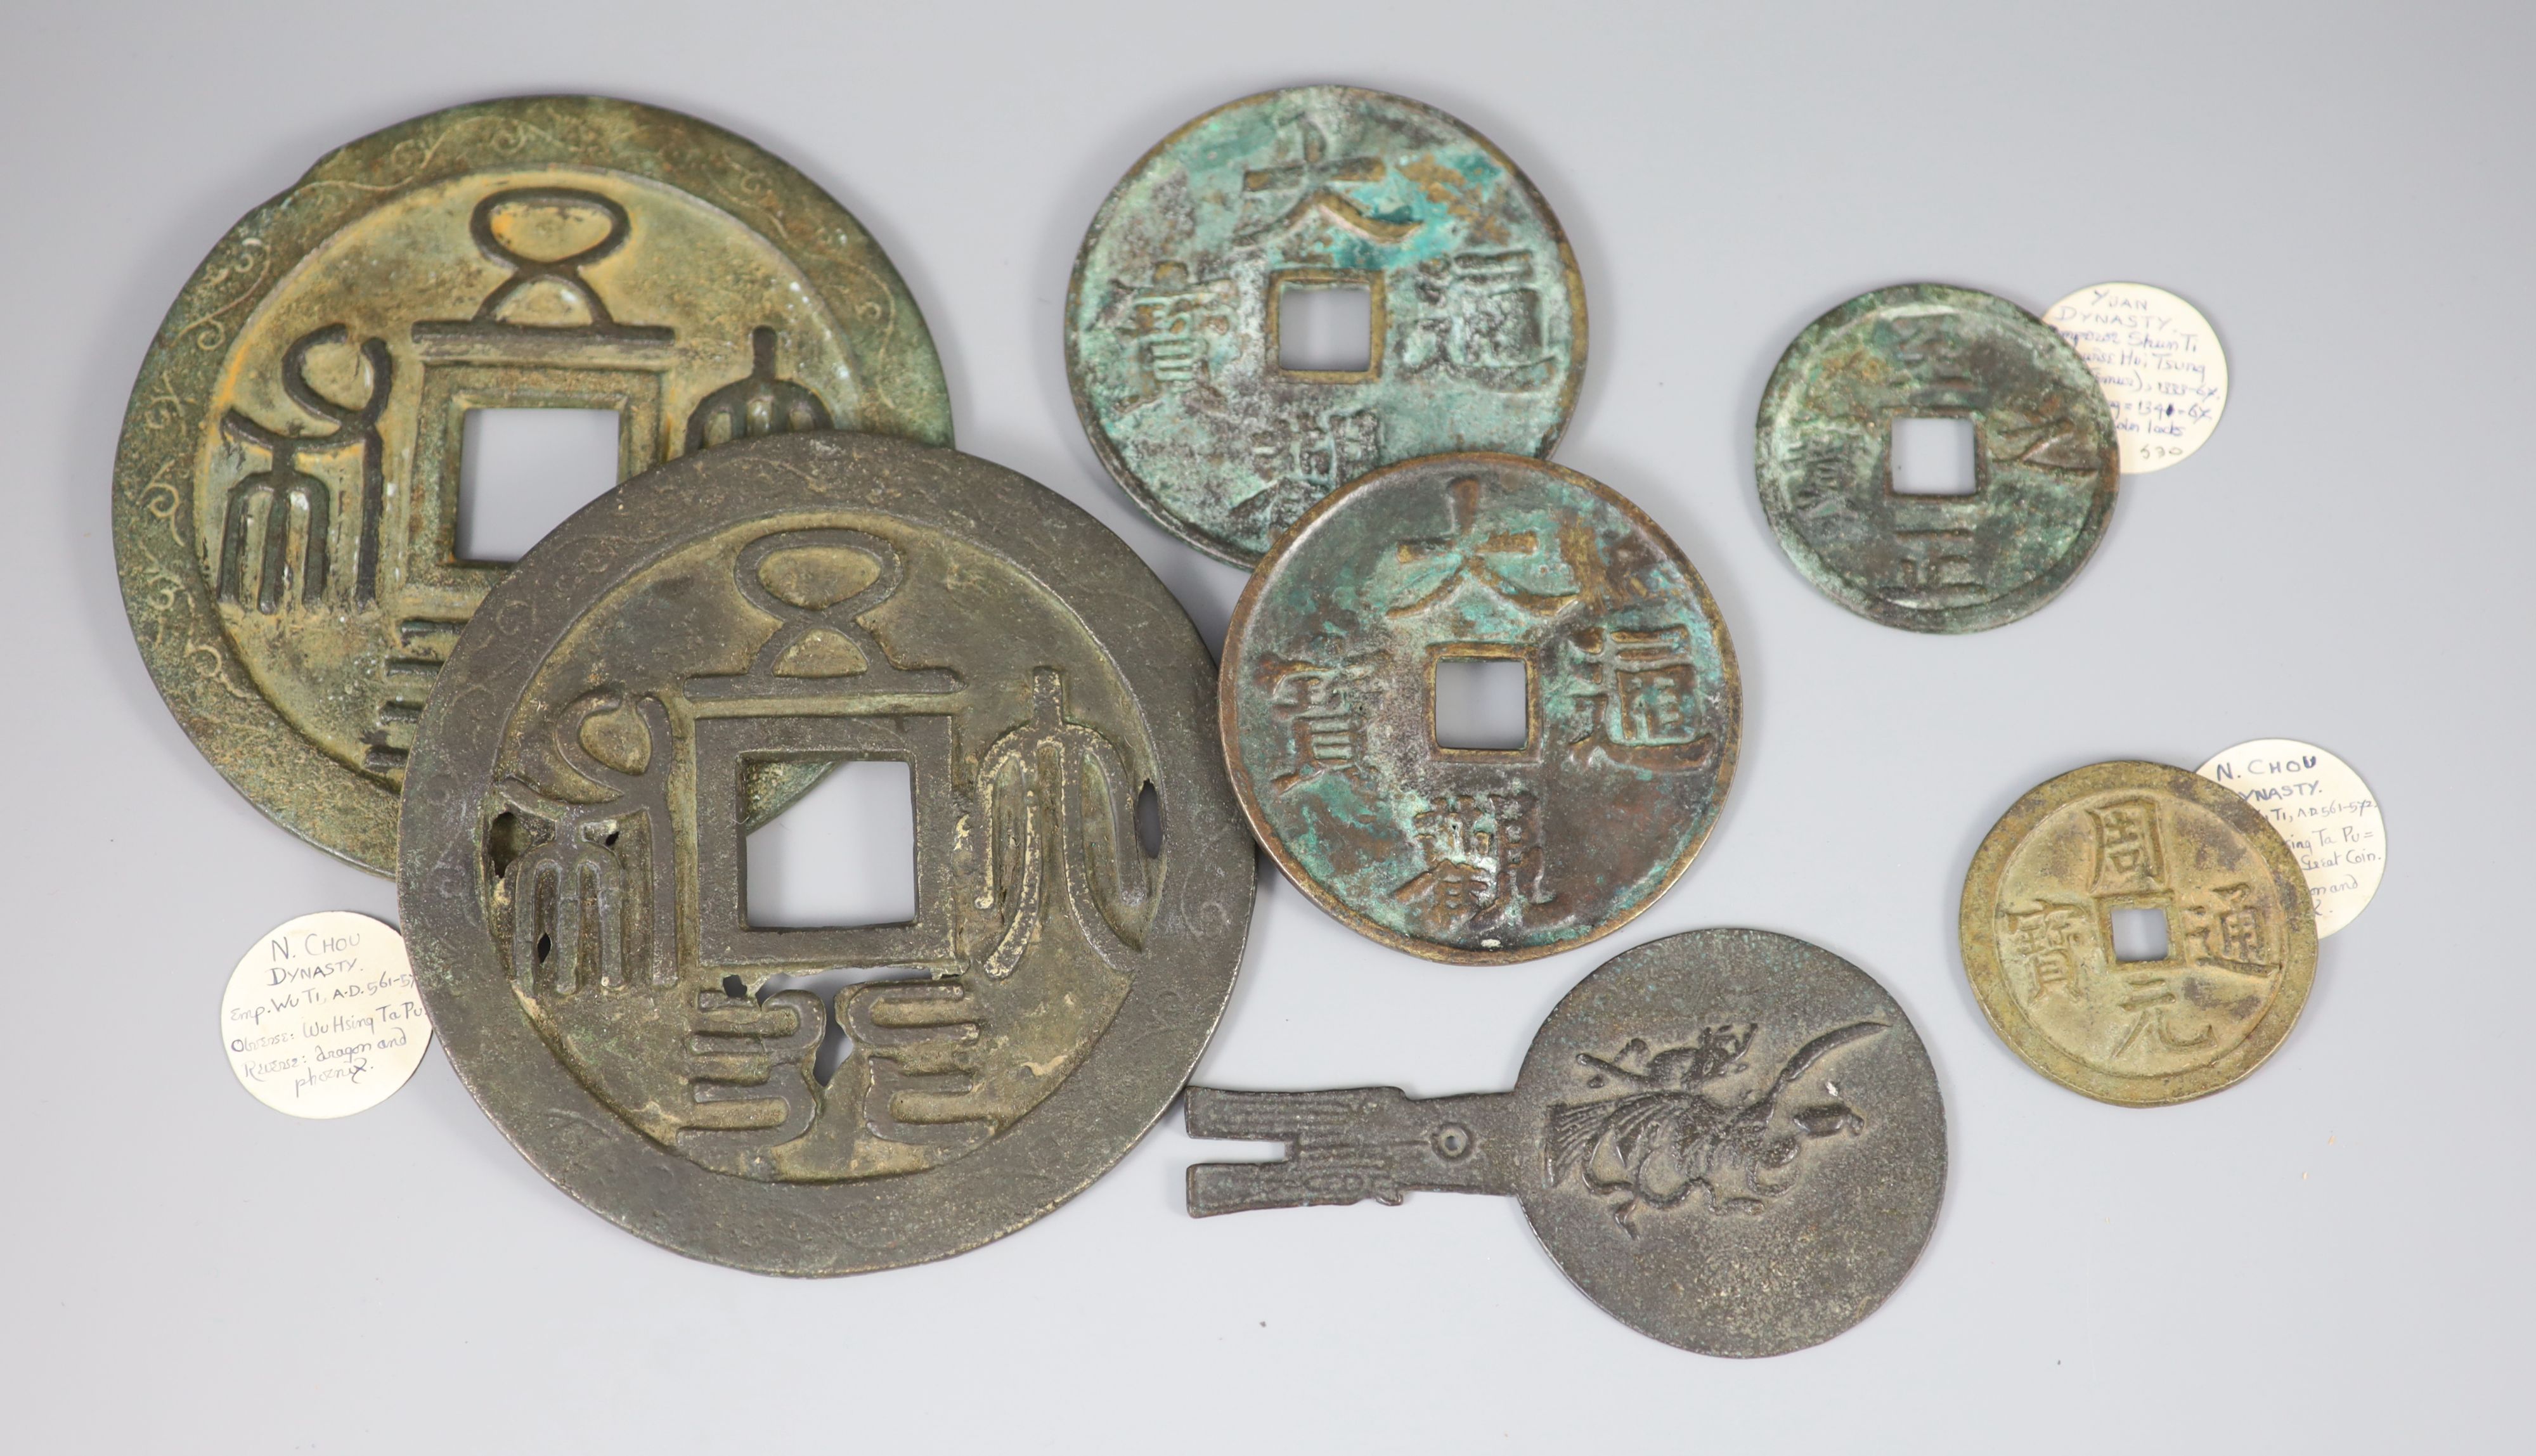 A group of 7 Chinese bronze coin charms or amulets, Qing dynasty- Republic period,